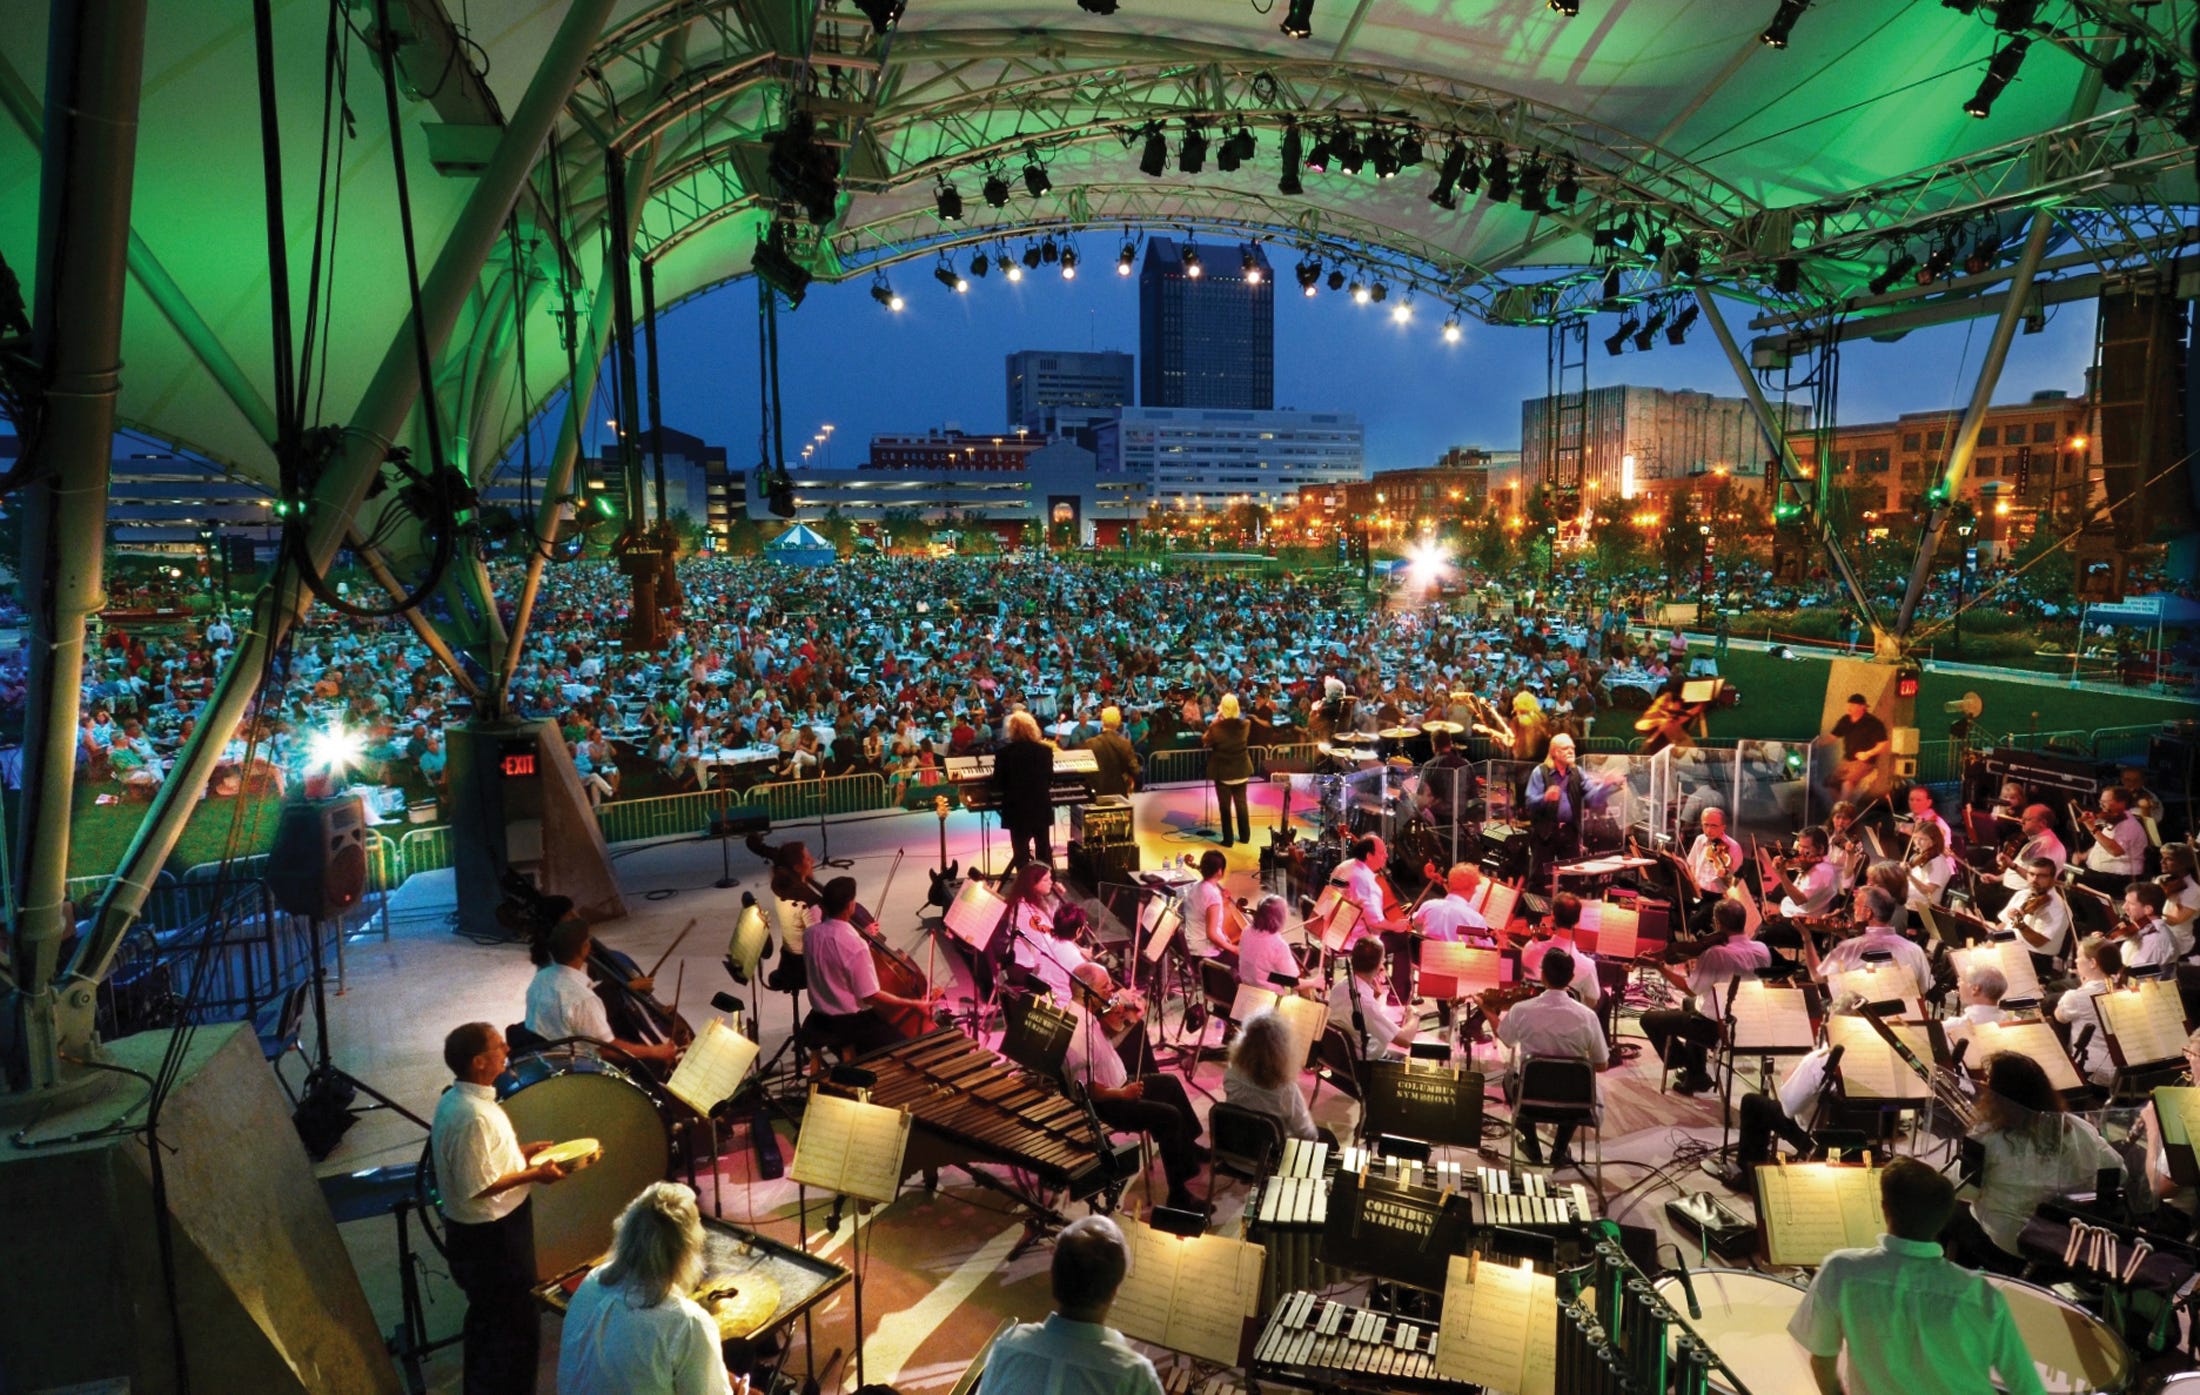 A Columbus Symphony Orchestra Picnic with the Pops concert